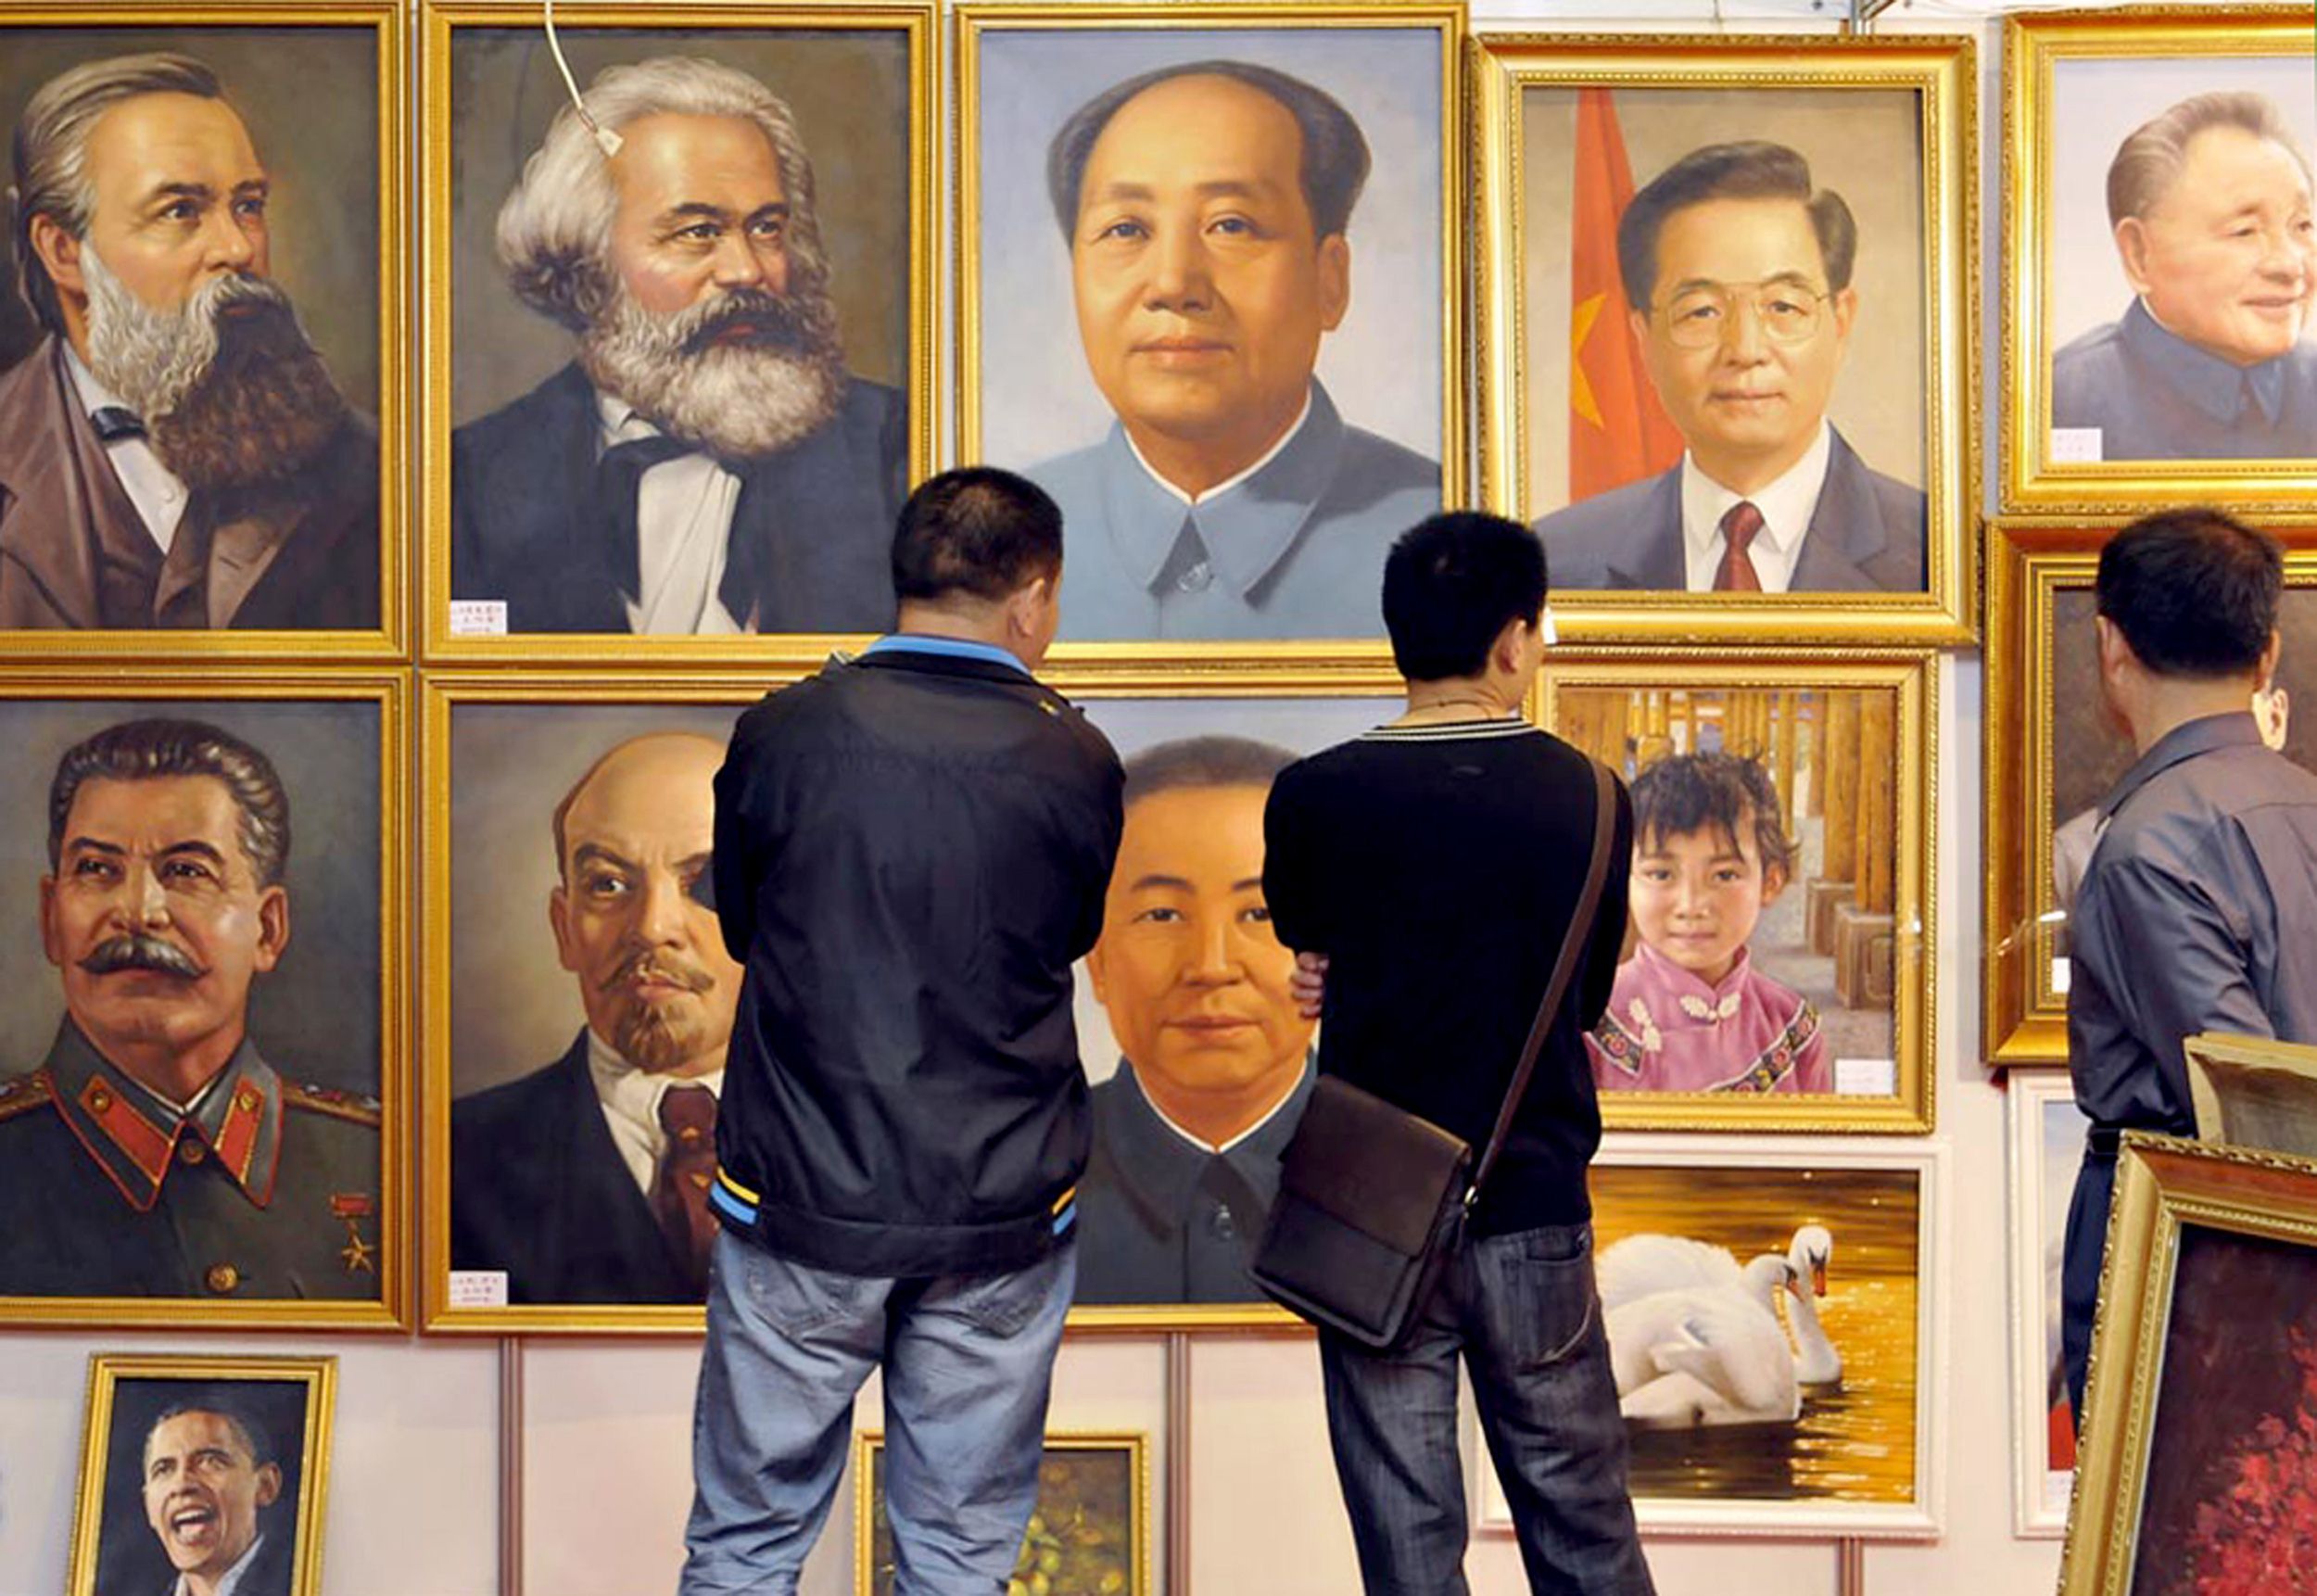 An exhibition held in Taiyuan. The Taiyuan authorities must be held against the yardsticks of law and moral conscience. Photo: AFP